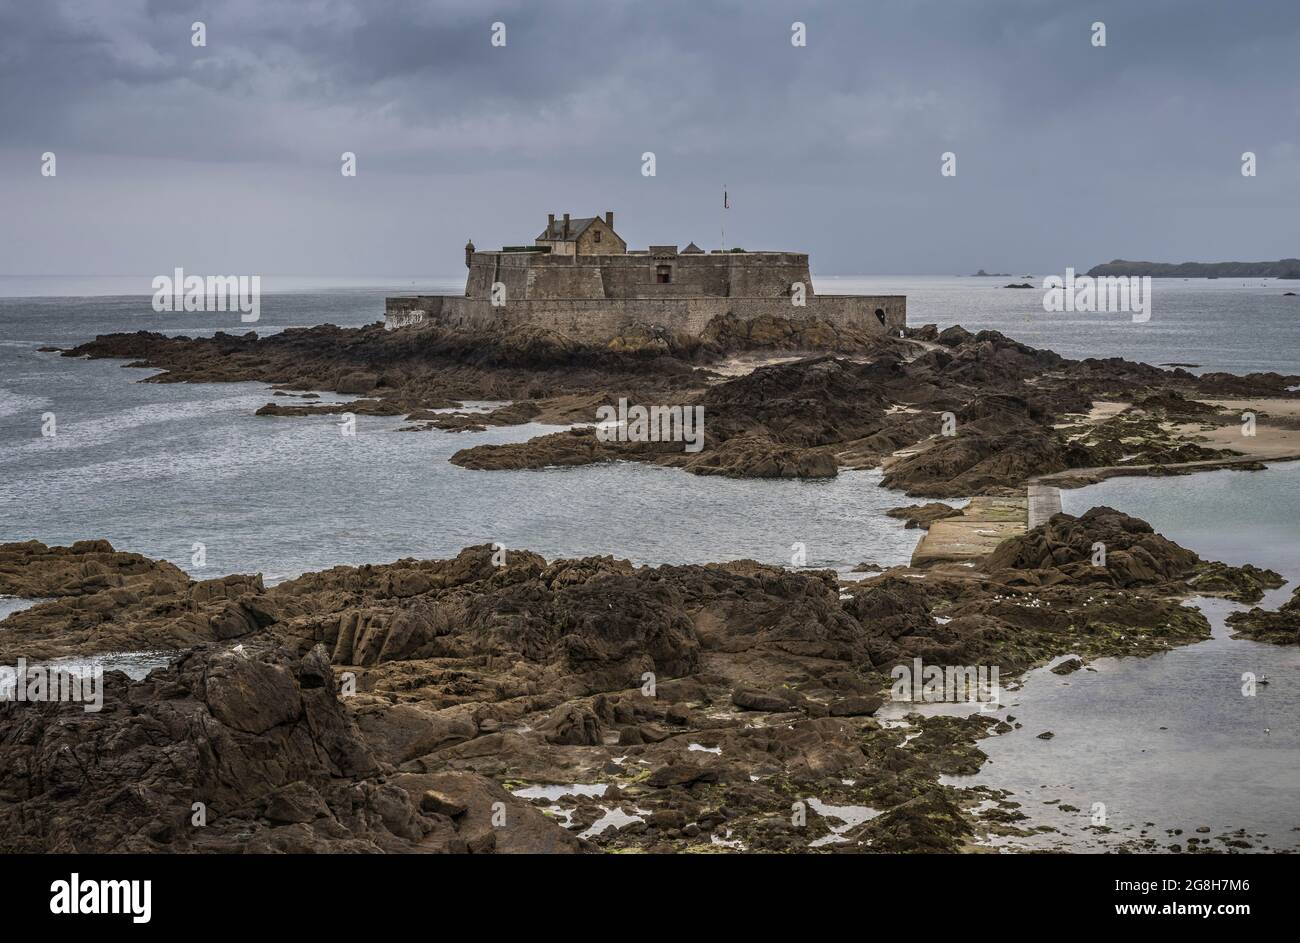 Fortress of St Malo on the french coast. Stock Photo